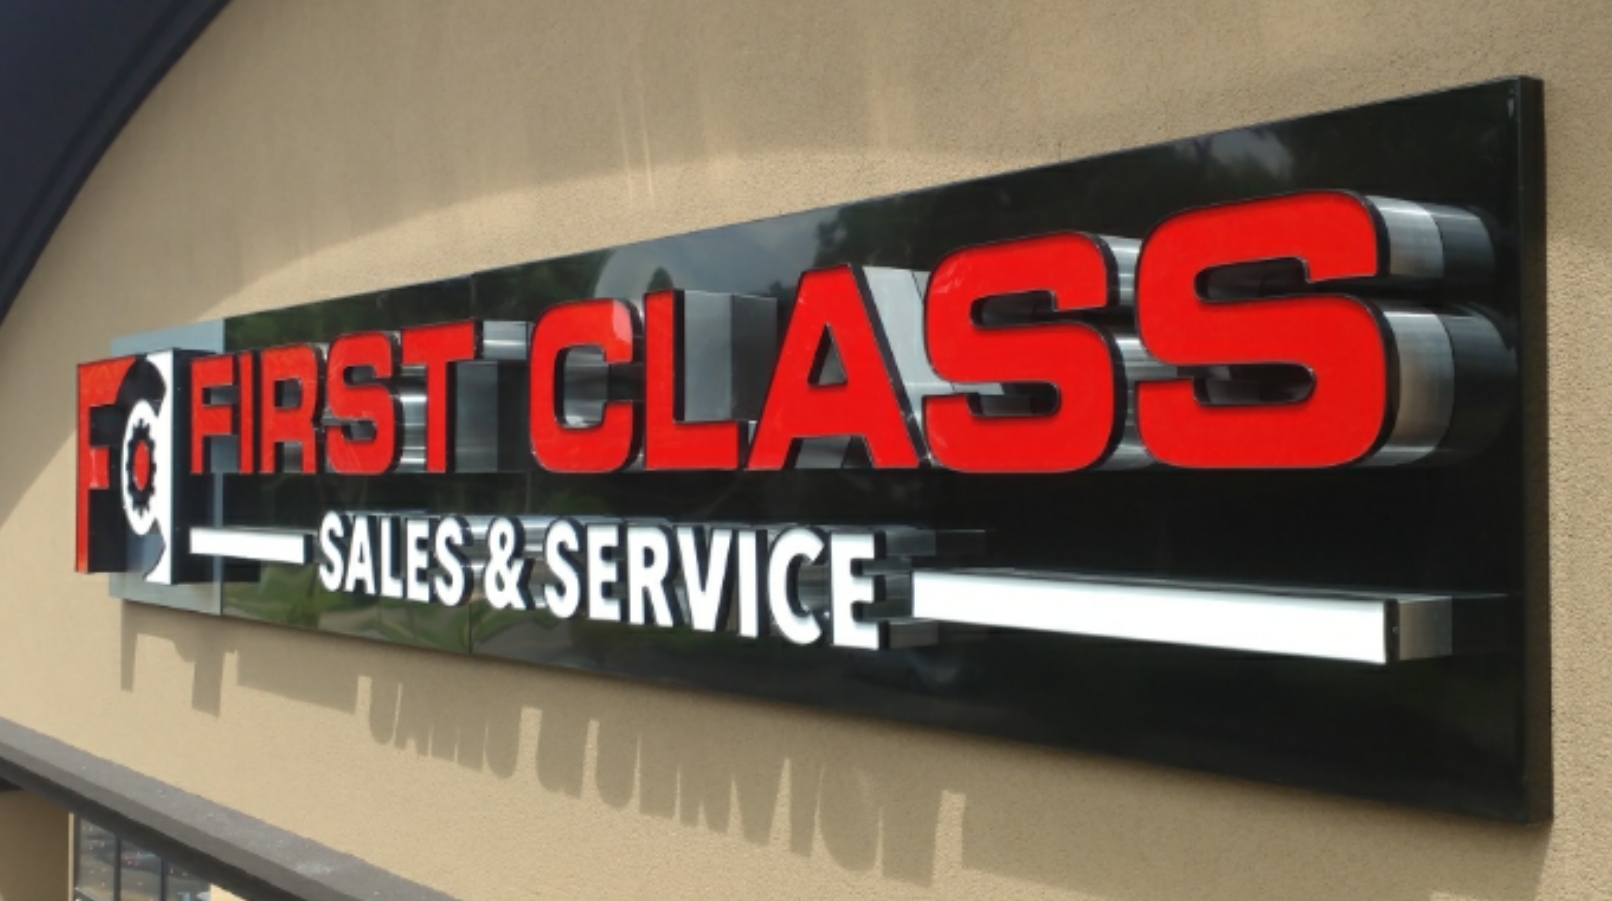 First Class Sales & Service in Smyrna, TN